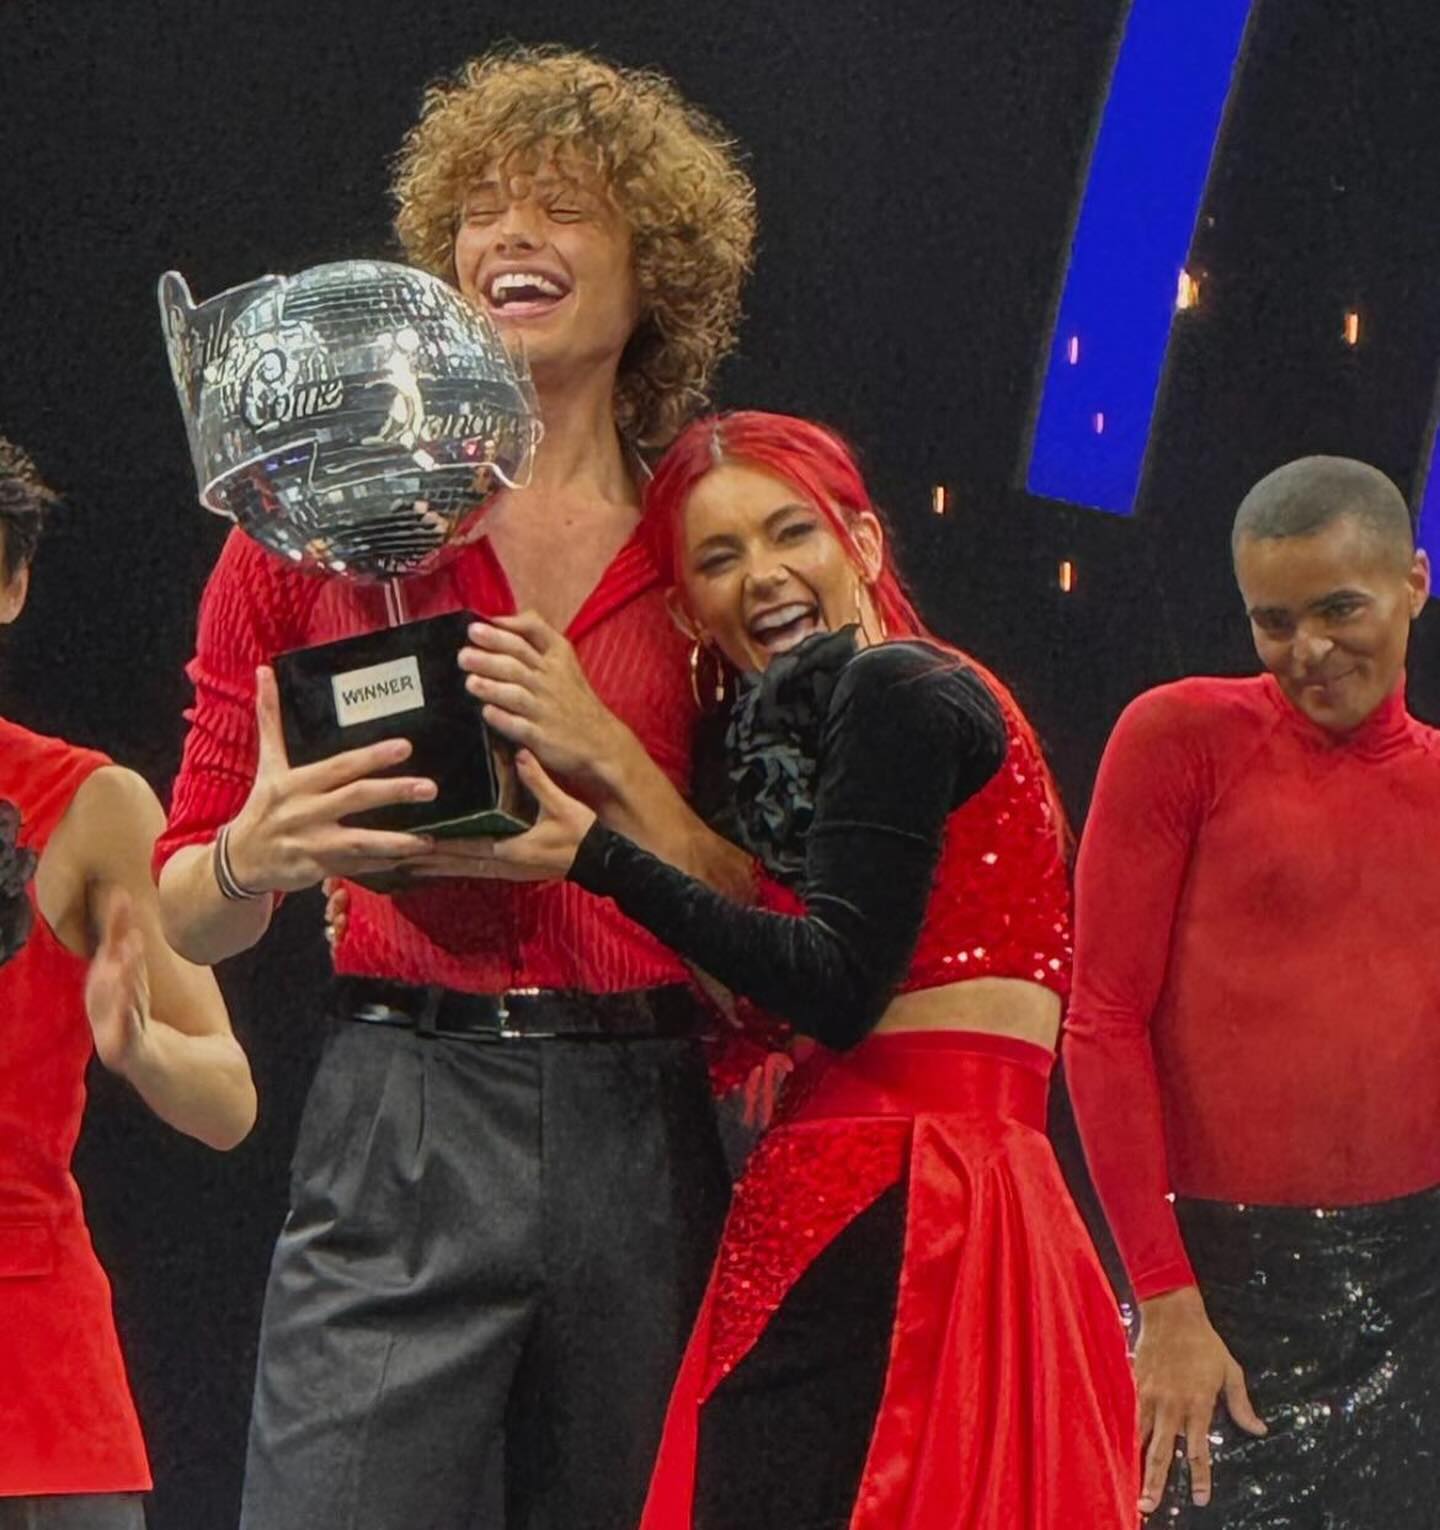 Strictly Come Dancing's Bobby Brazier was seen cuddling up with Dianne Buswell on the show's tour in Birmingham